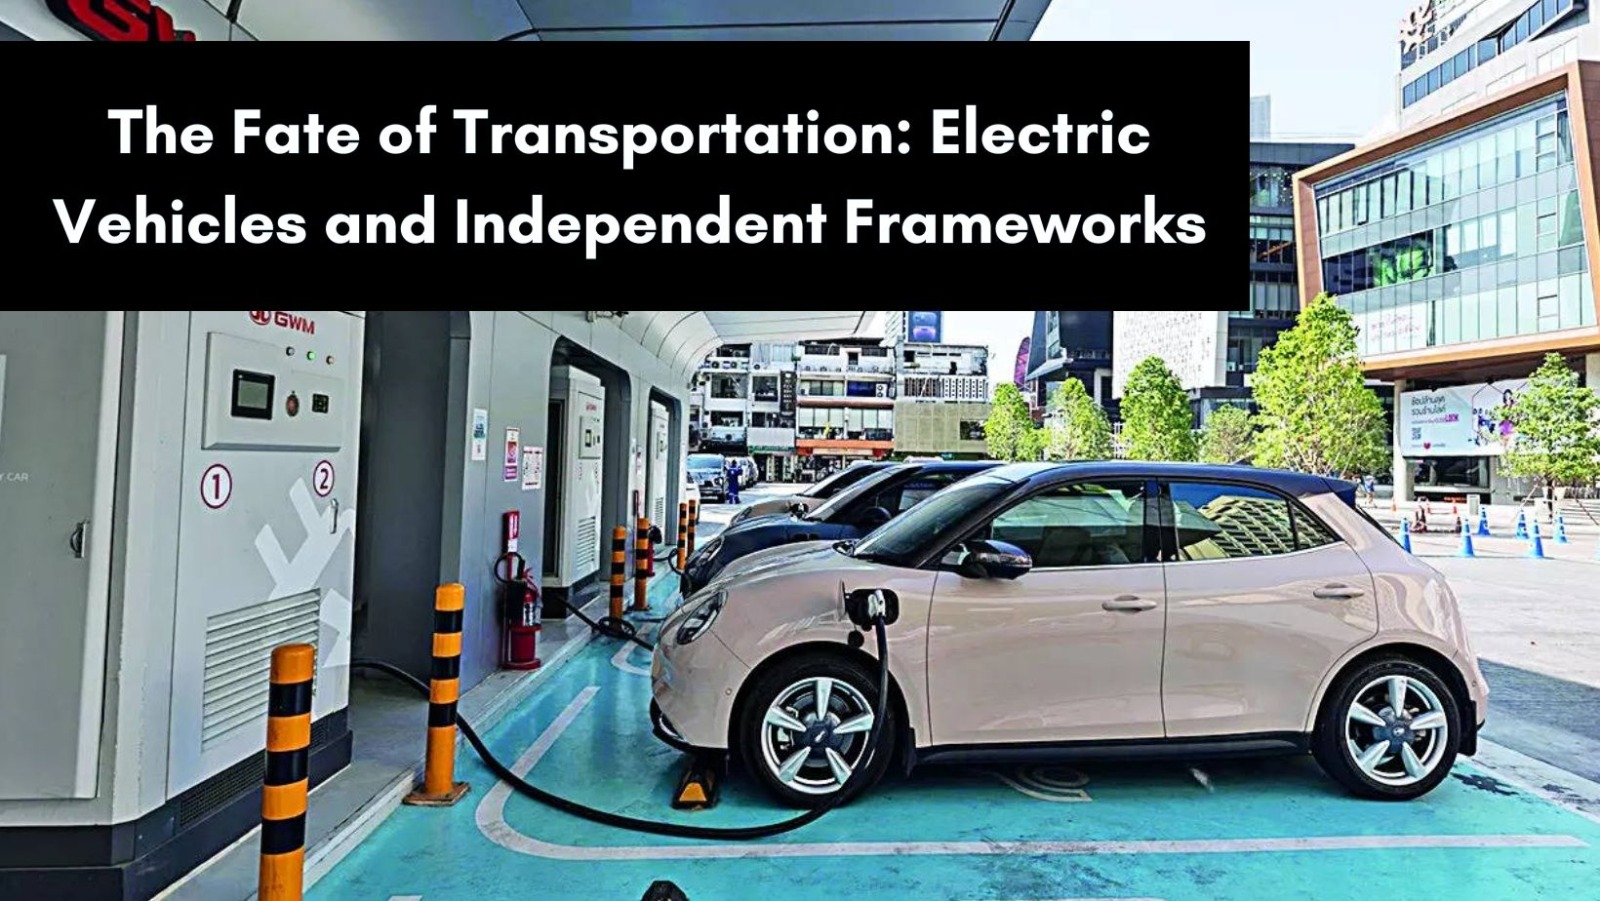 The Fate of Transportation: Electric Vehicles and Independent Frameworks